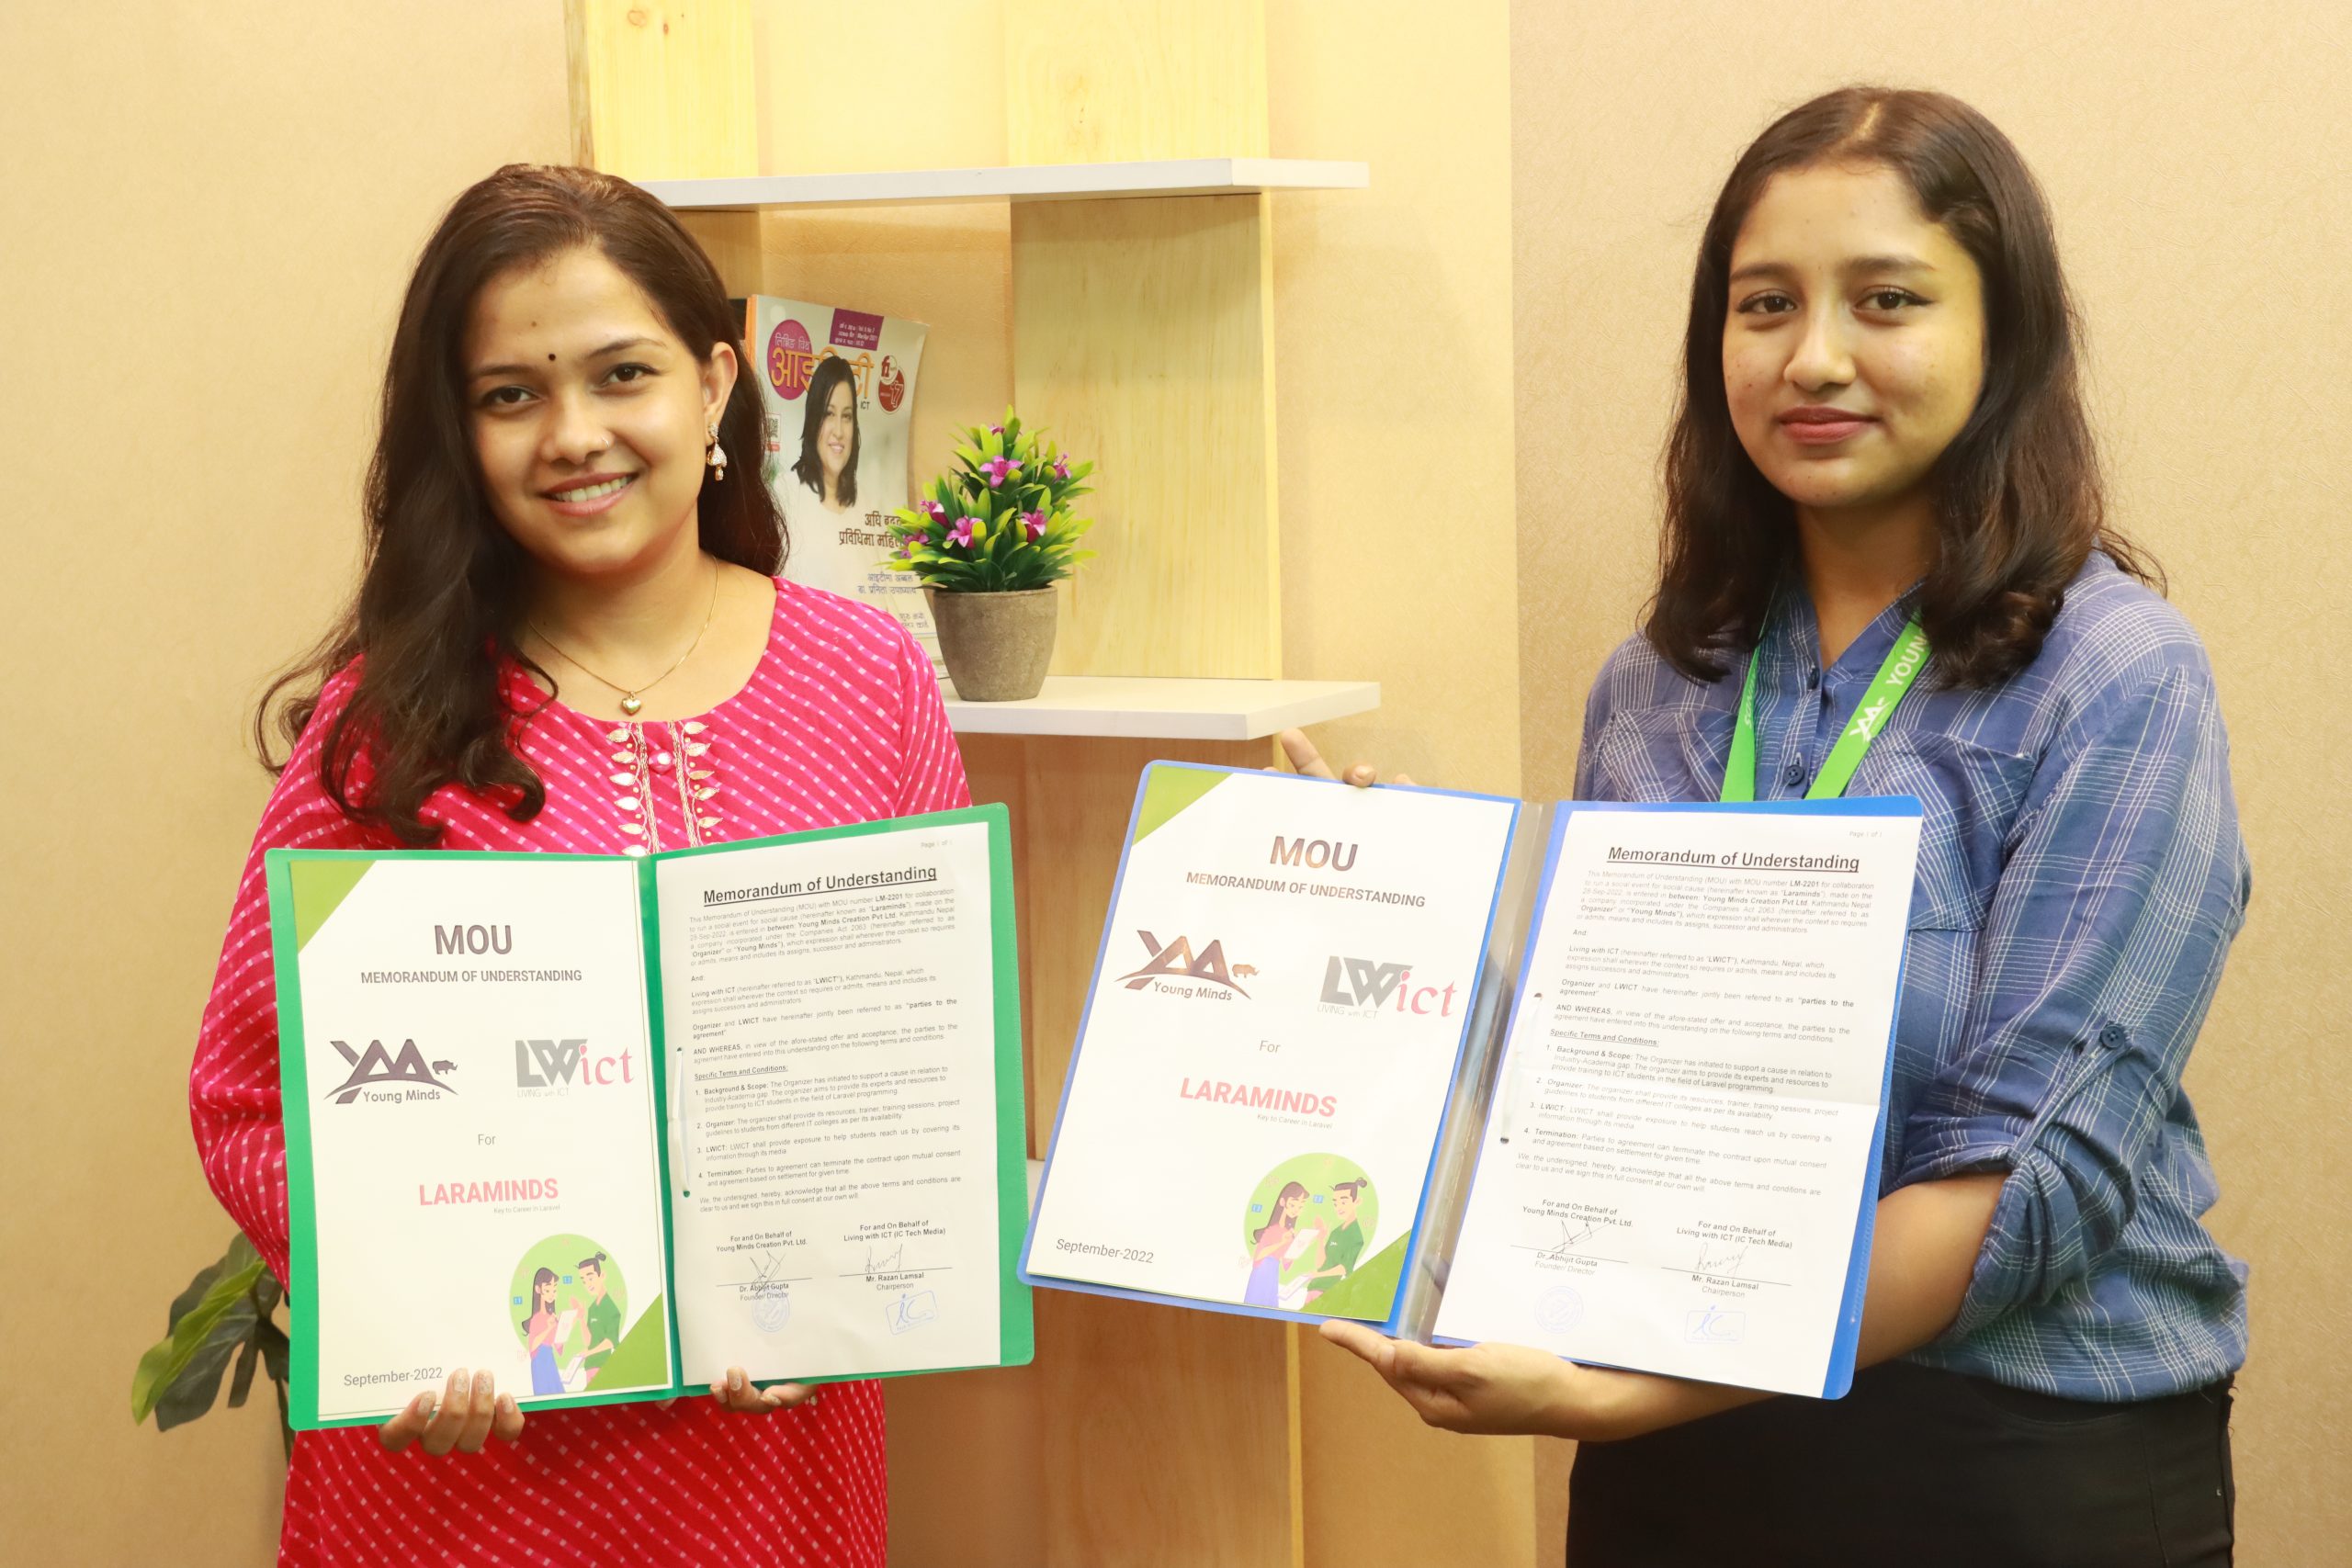 Mia Khalifasex Videos - Young Minds â€“ LwICT signs MoU for Laraminds